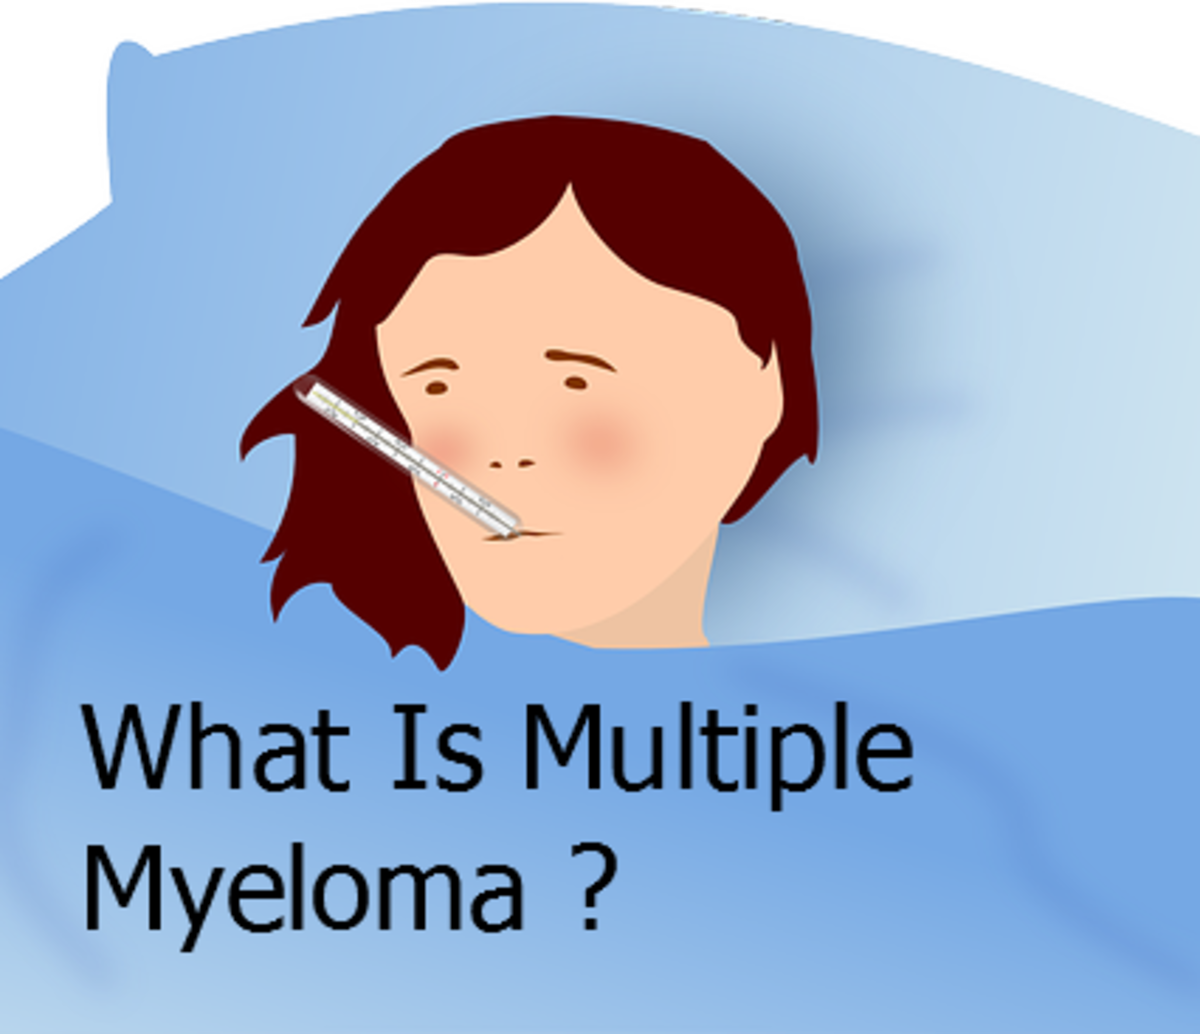 Multiple Myeloma Is a Type of Cancer